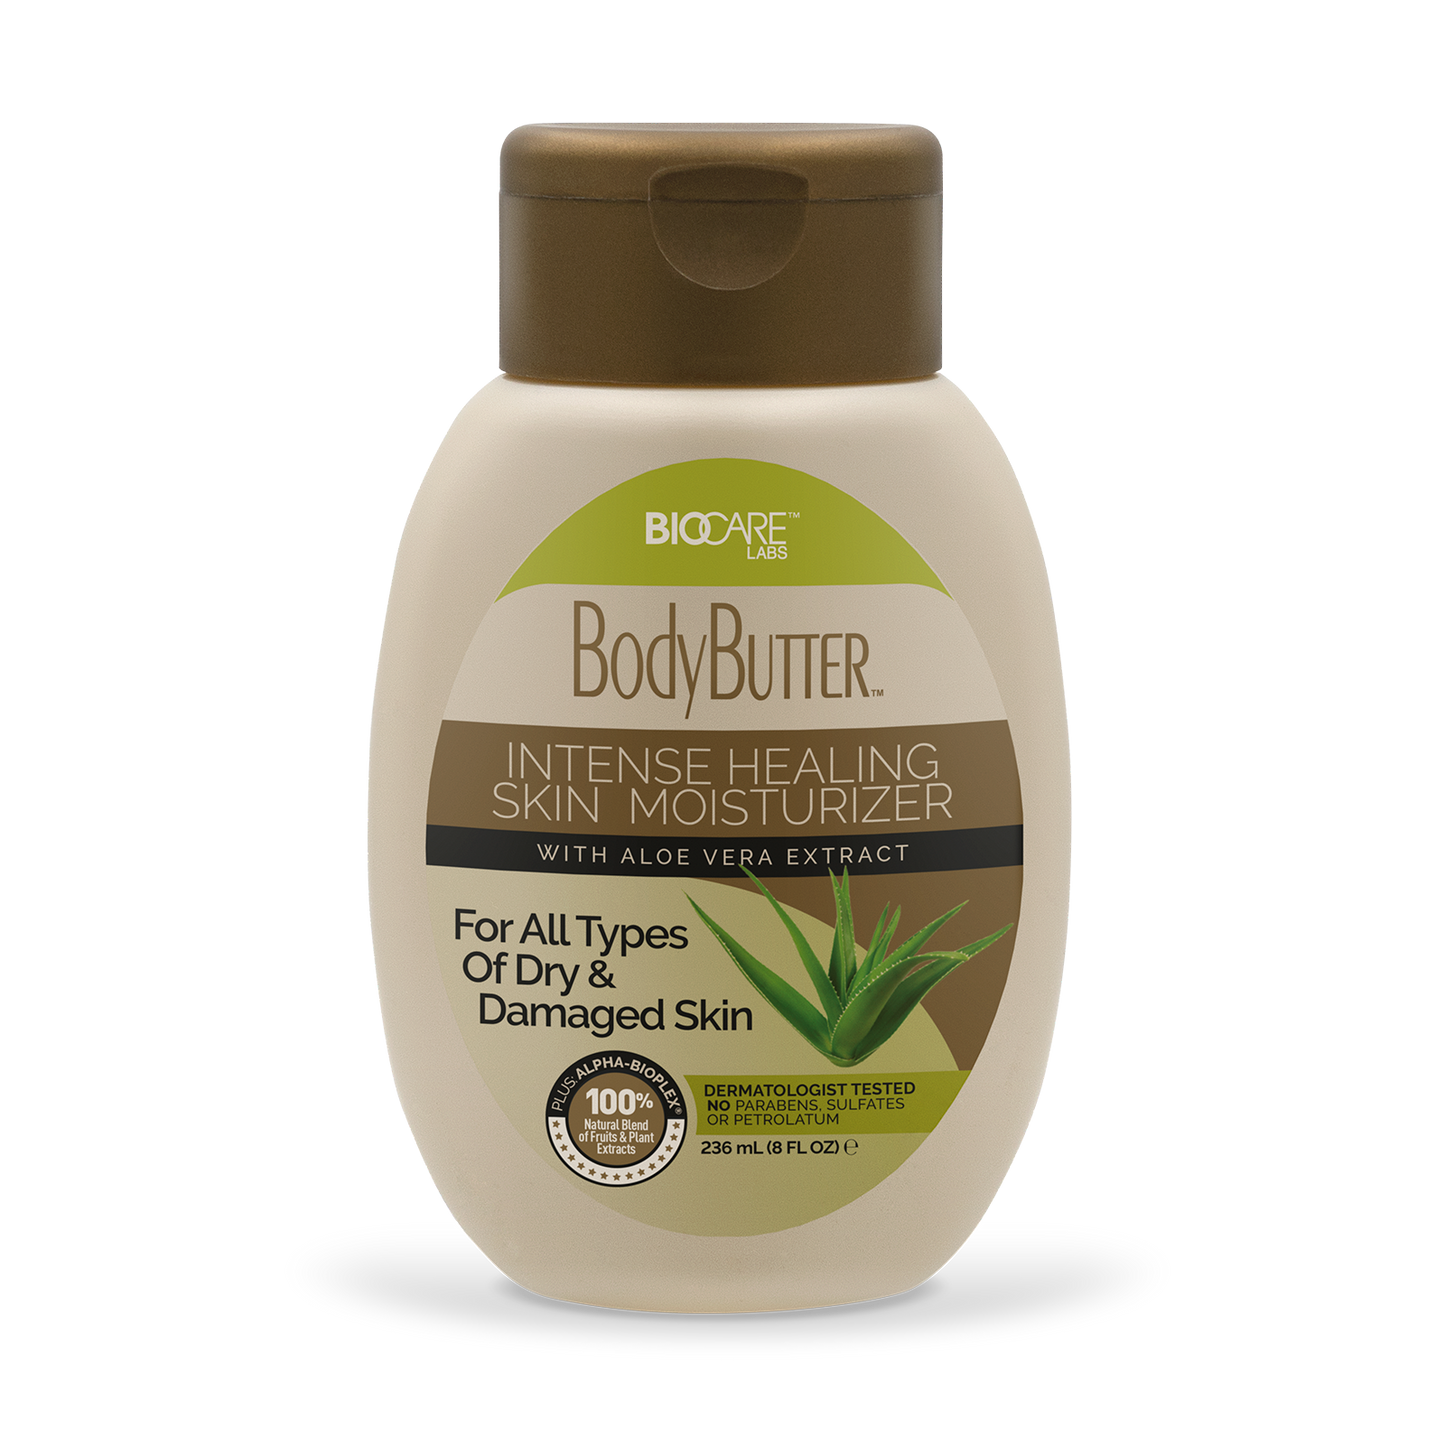 8 oz container of BodyButter™ With Aloe Vera Extract, Cucumber Extract, & Alpha-Bioplex ®